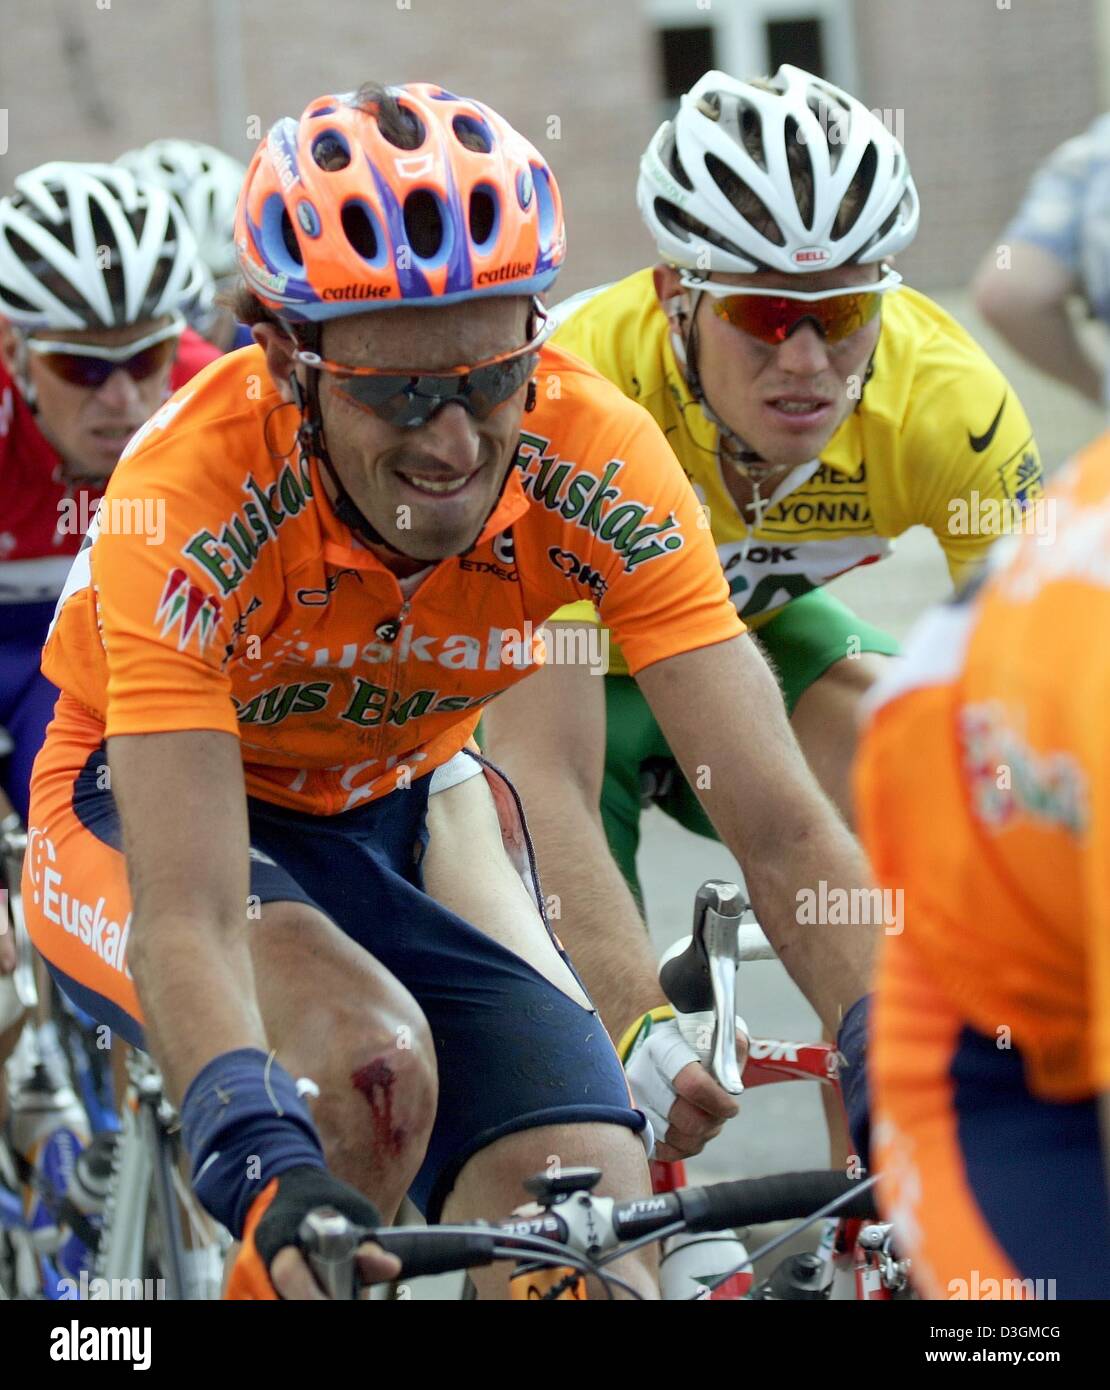 dpa) - Spanish cyclist Iban Mayo (L) of team Euskaltel-Euskadi and  Norwegian cyclist Thor Hushovd of team Credit Agricole, who wears the yellow  jersey of the overall leader, struggle after a crash